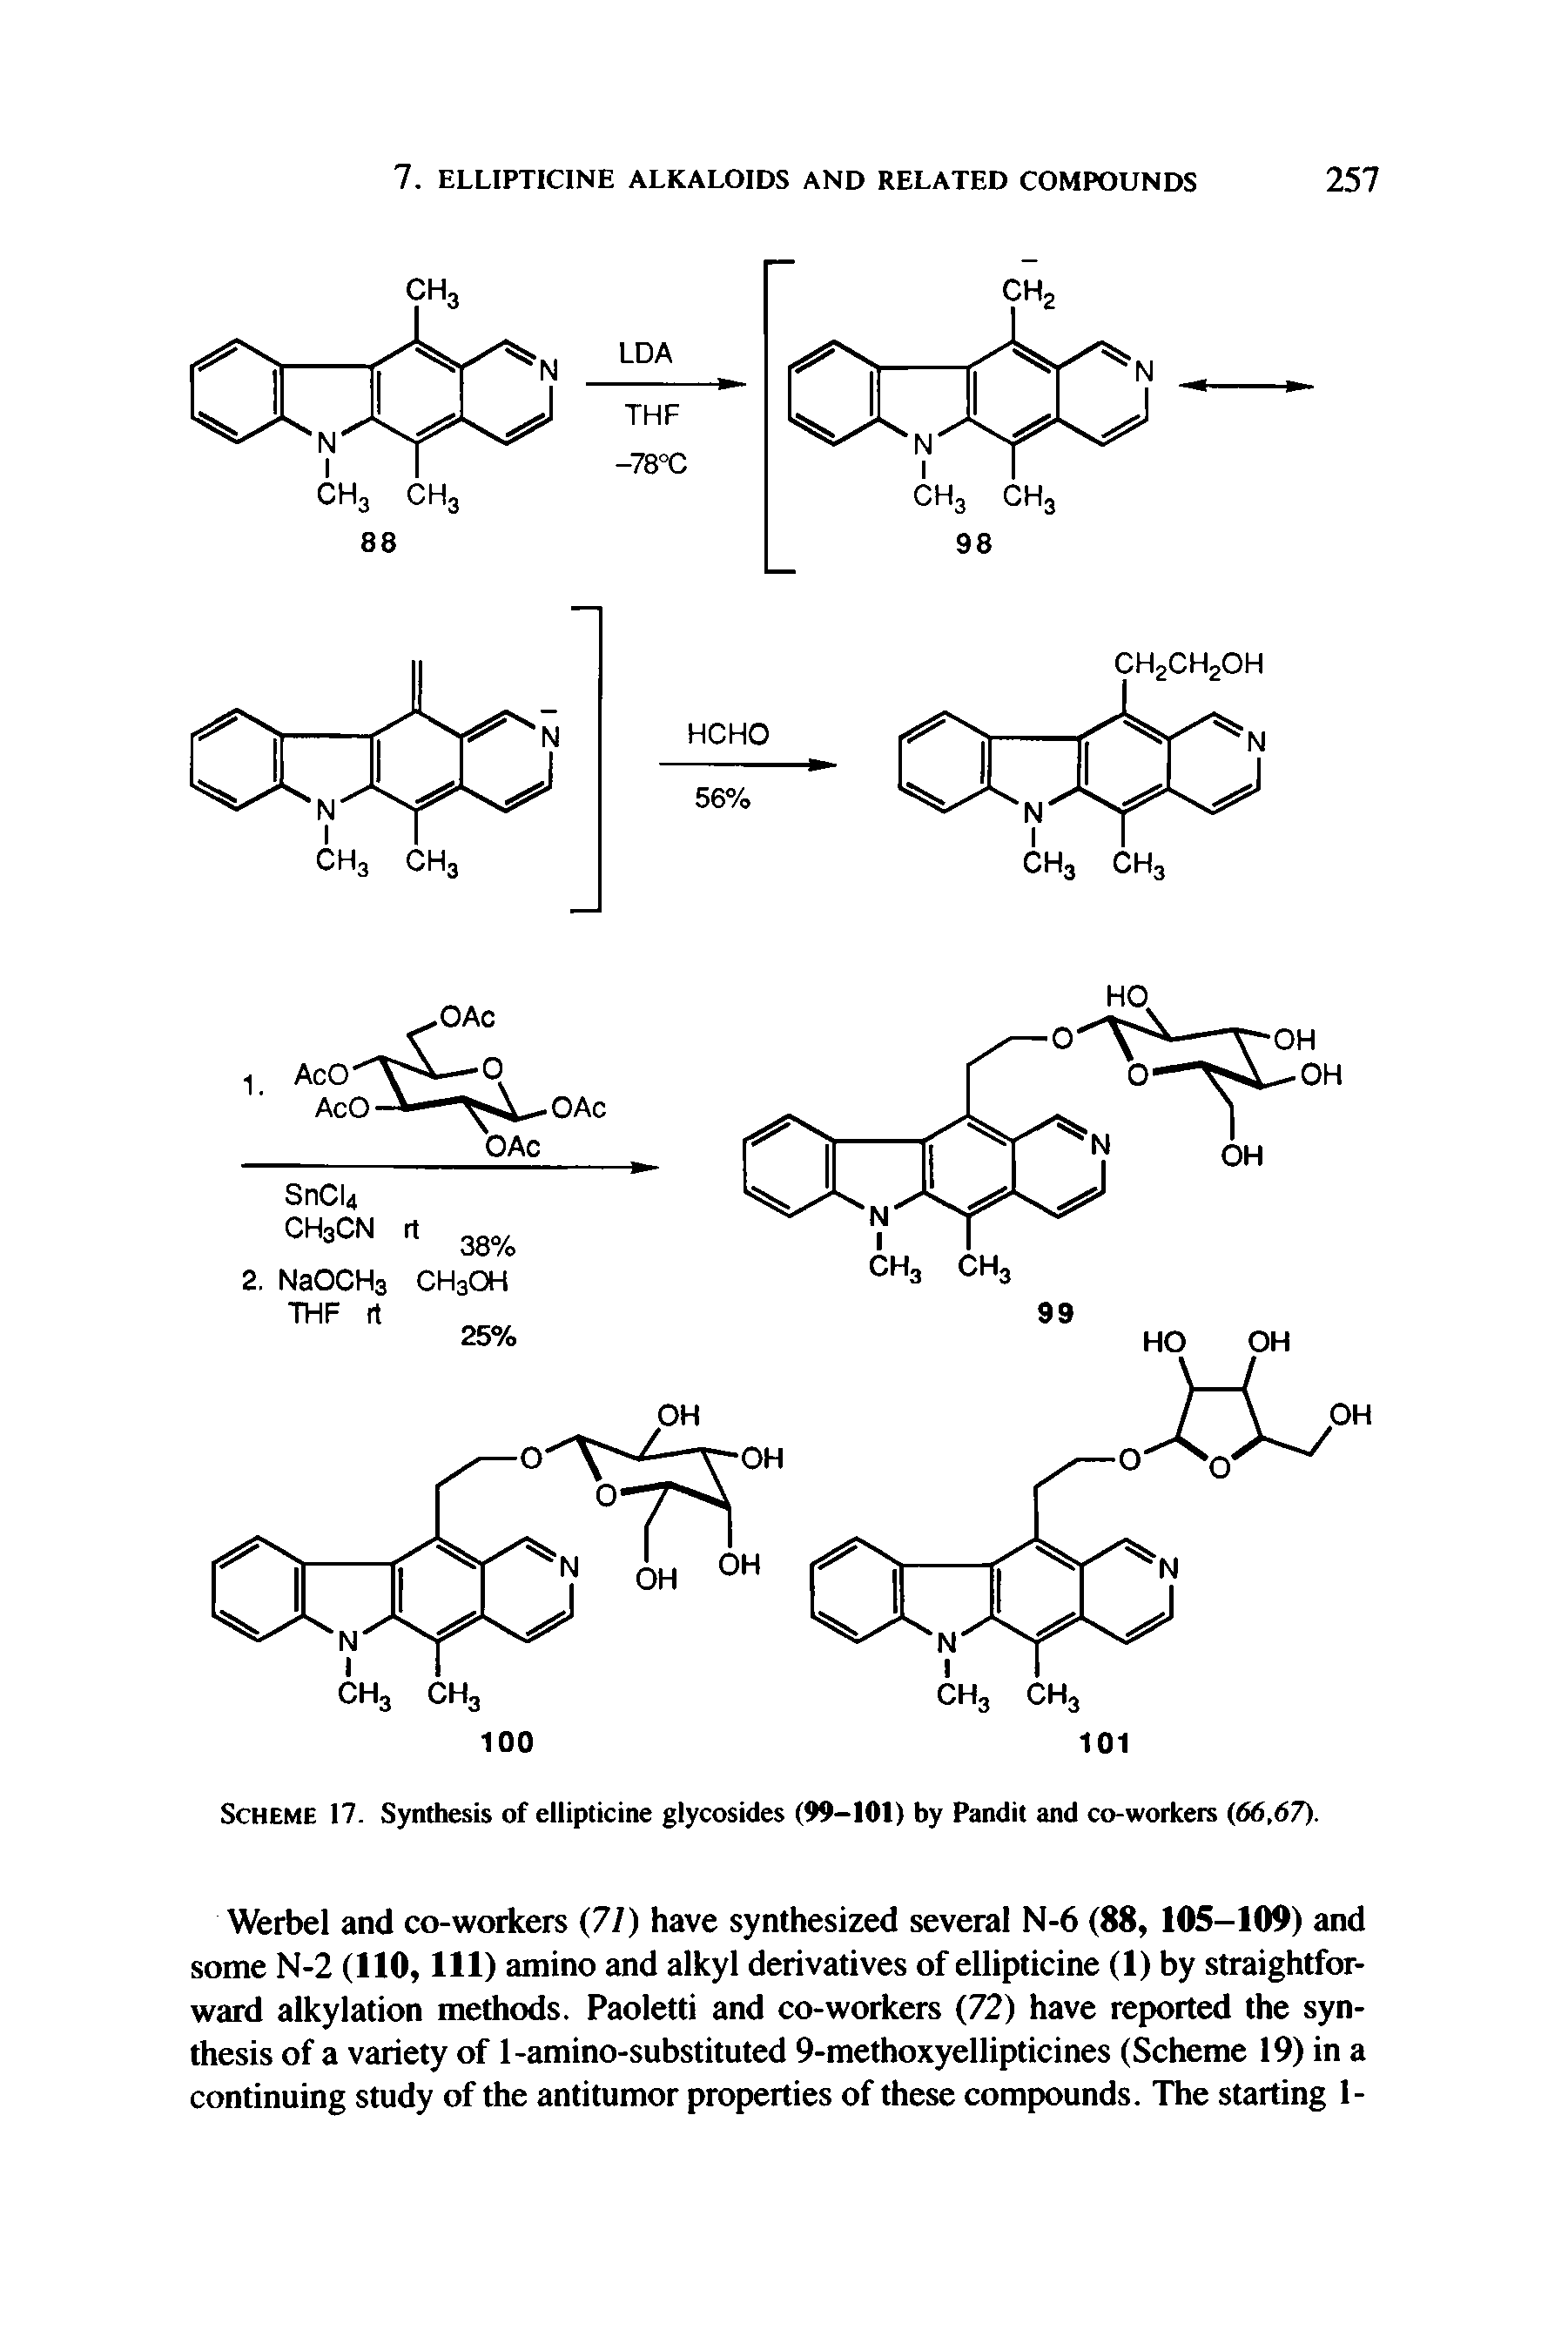 Scheme 17. Synthesis of ellipticine glycosides (99-101) by Pandit and co-workers (66,67).